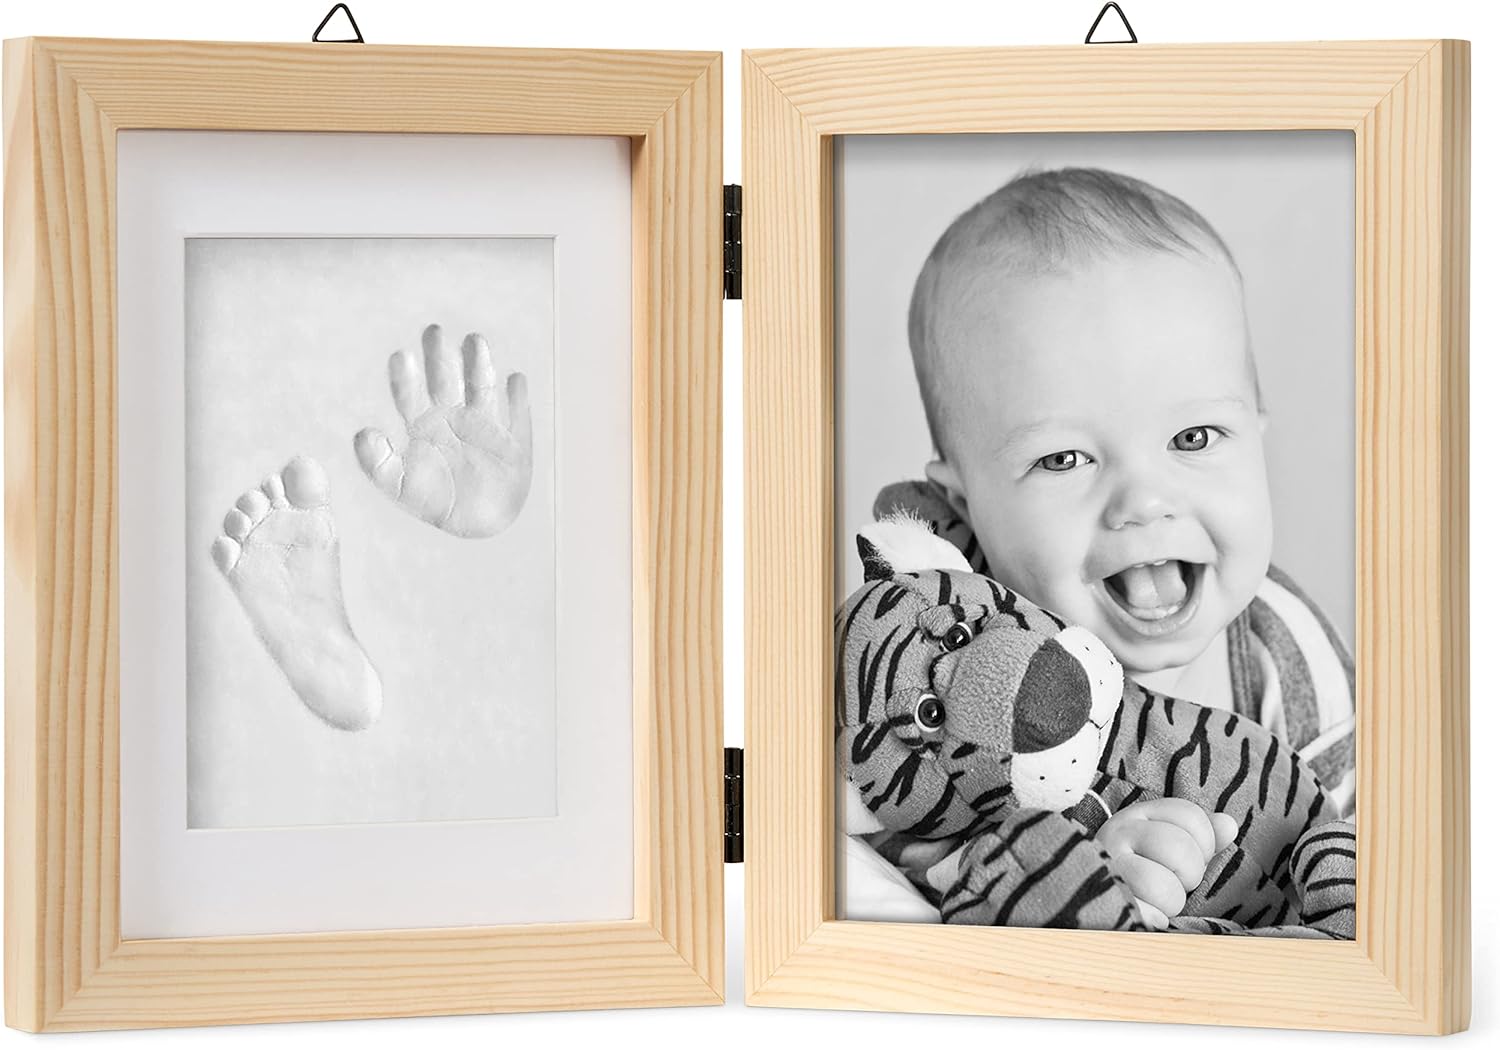 Chuckle White Baby Hand and Foot Clay Print Photo Frame Keepsake Kit Gift New